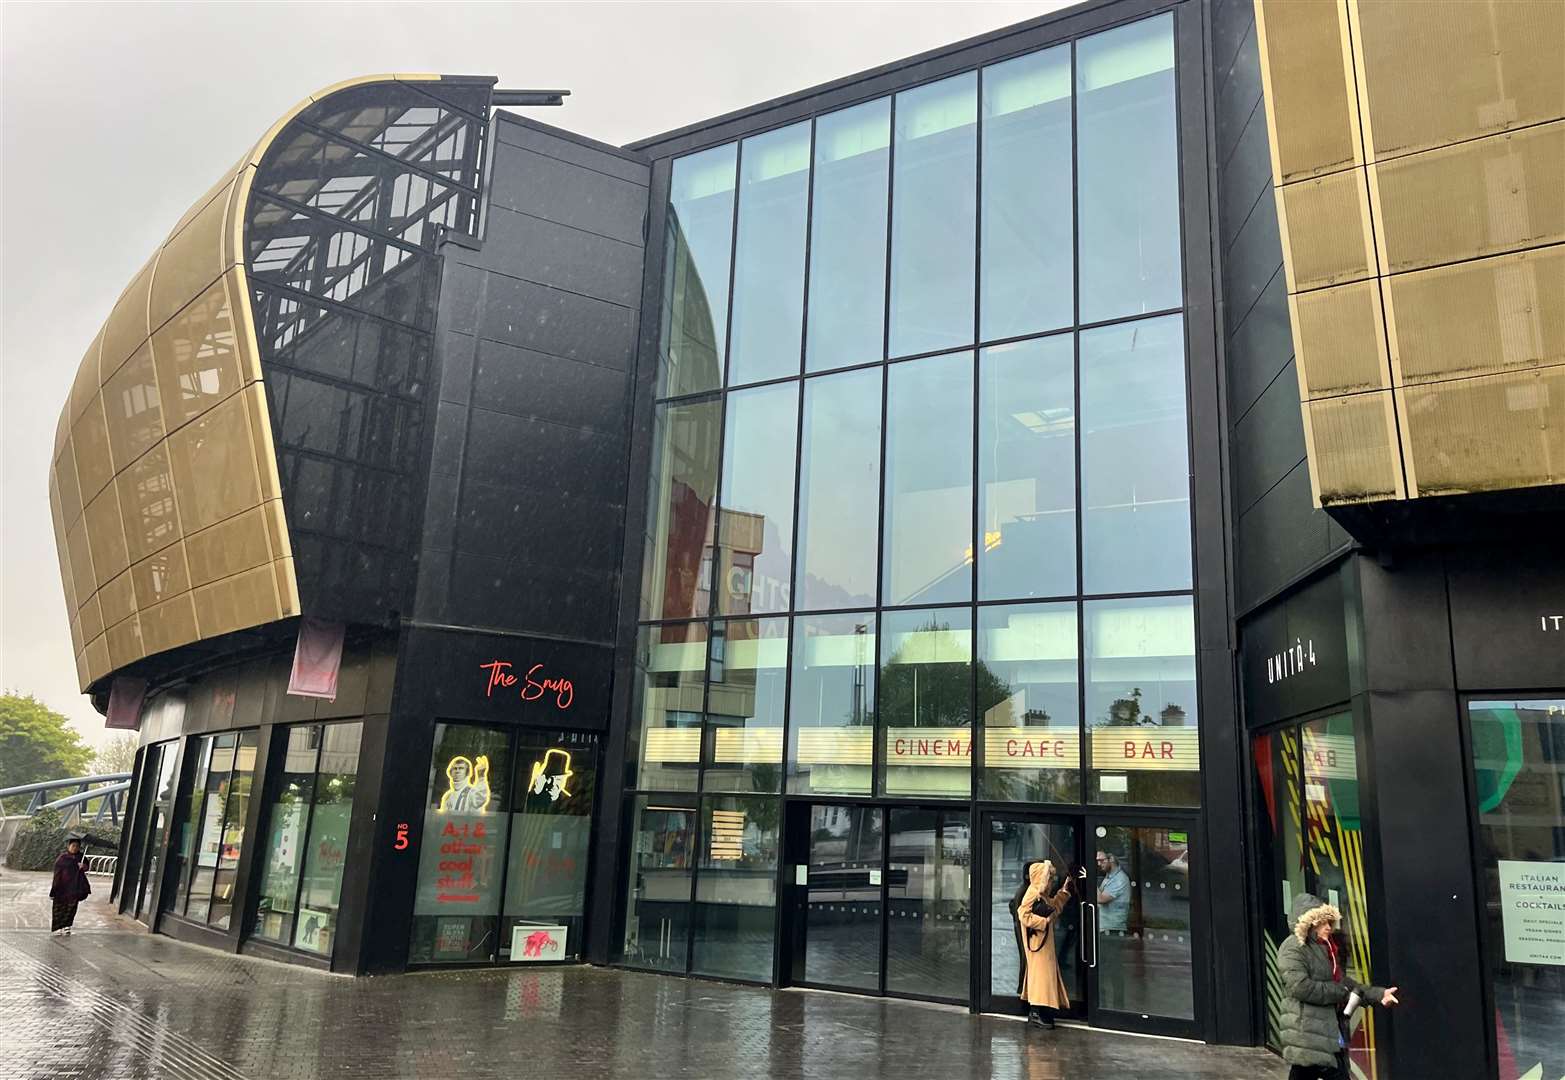 The six-screen cinema opened at Elwick Place in 2018